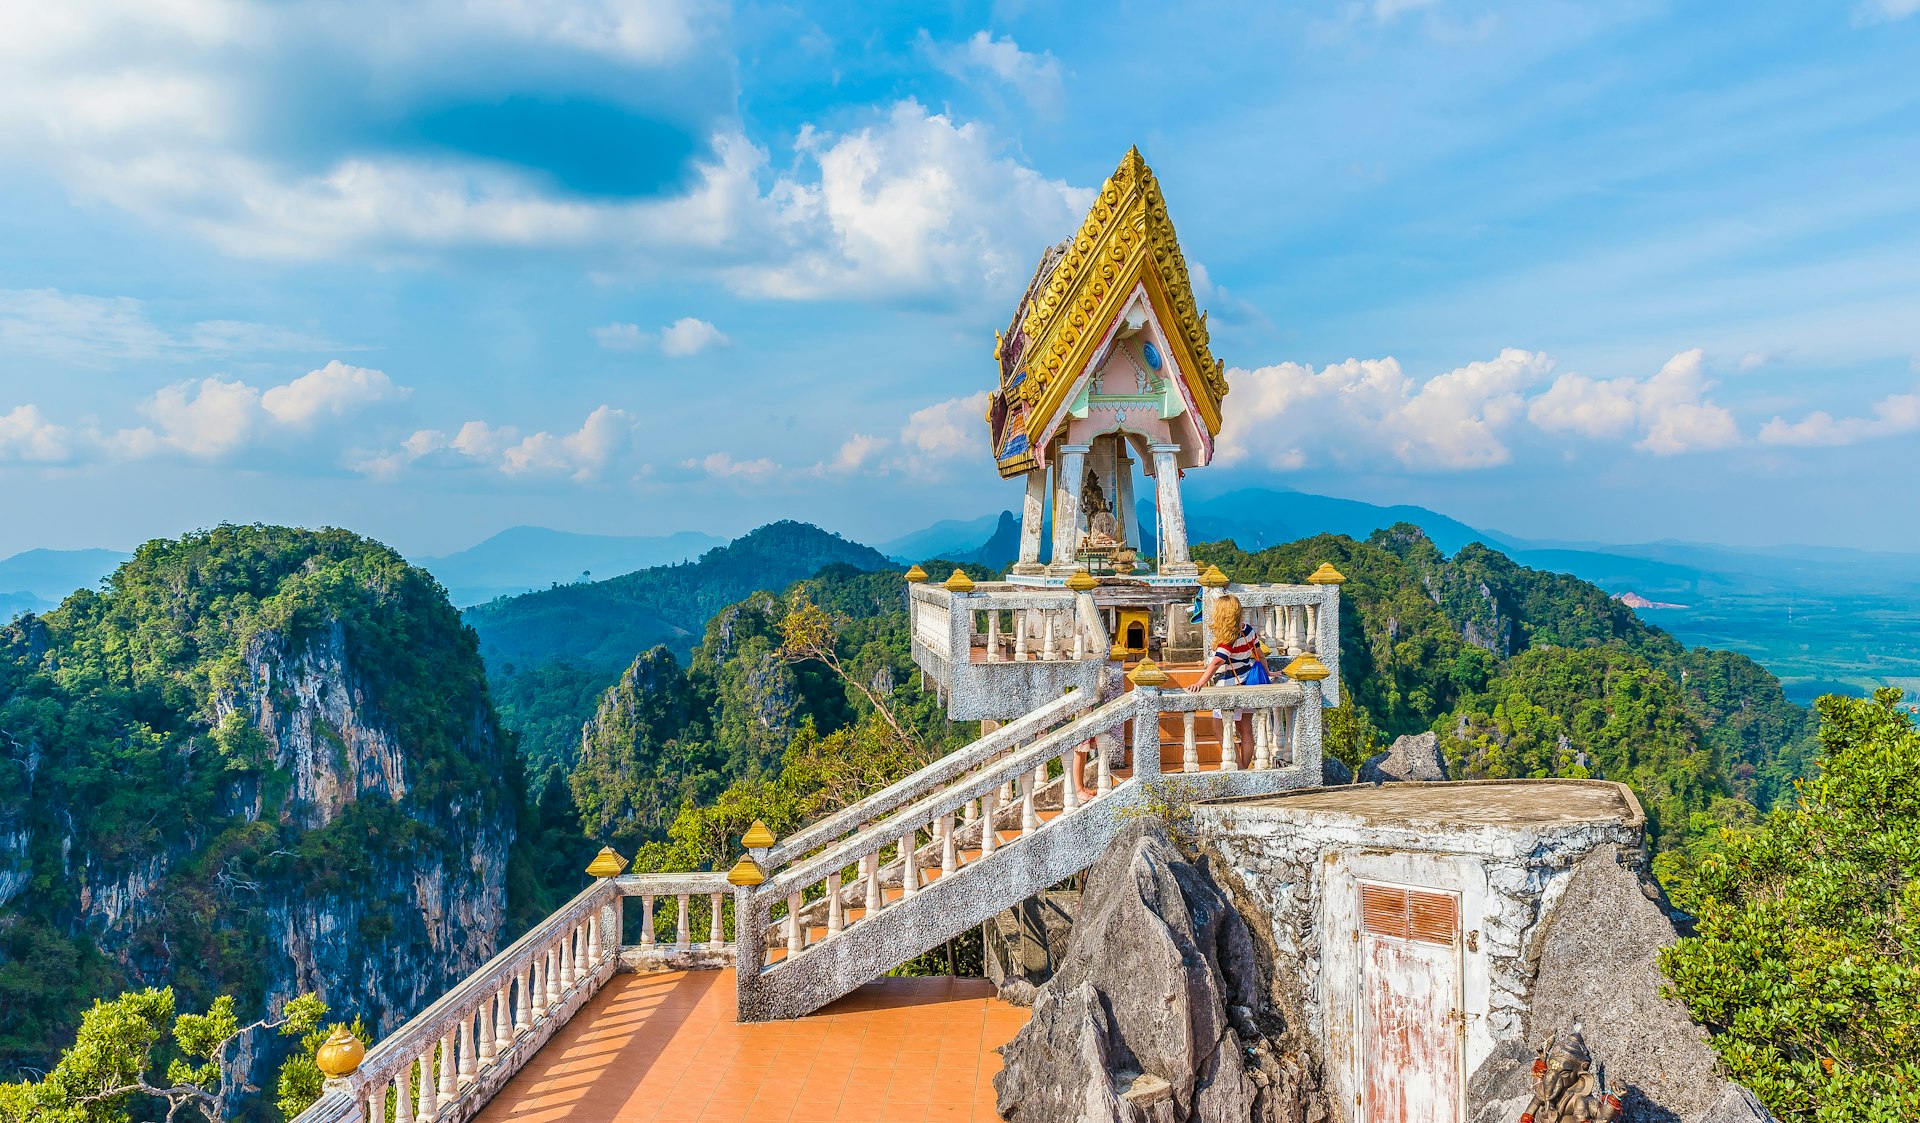 Scenic outlook of mountains from Tiger Cave temple, (Wat Tham Suea), Krabi region, Thailand